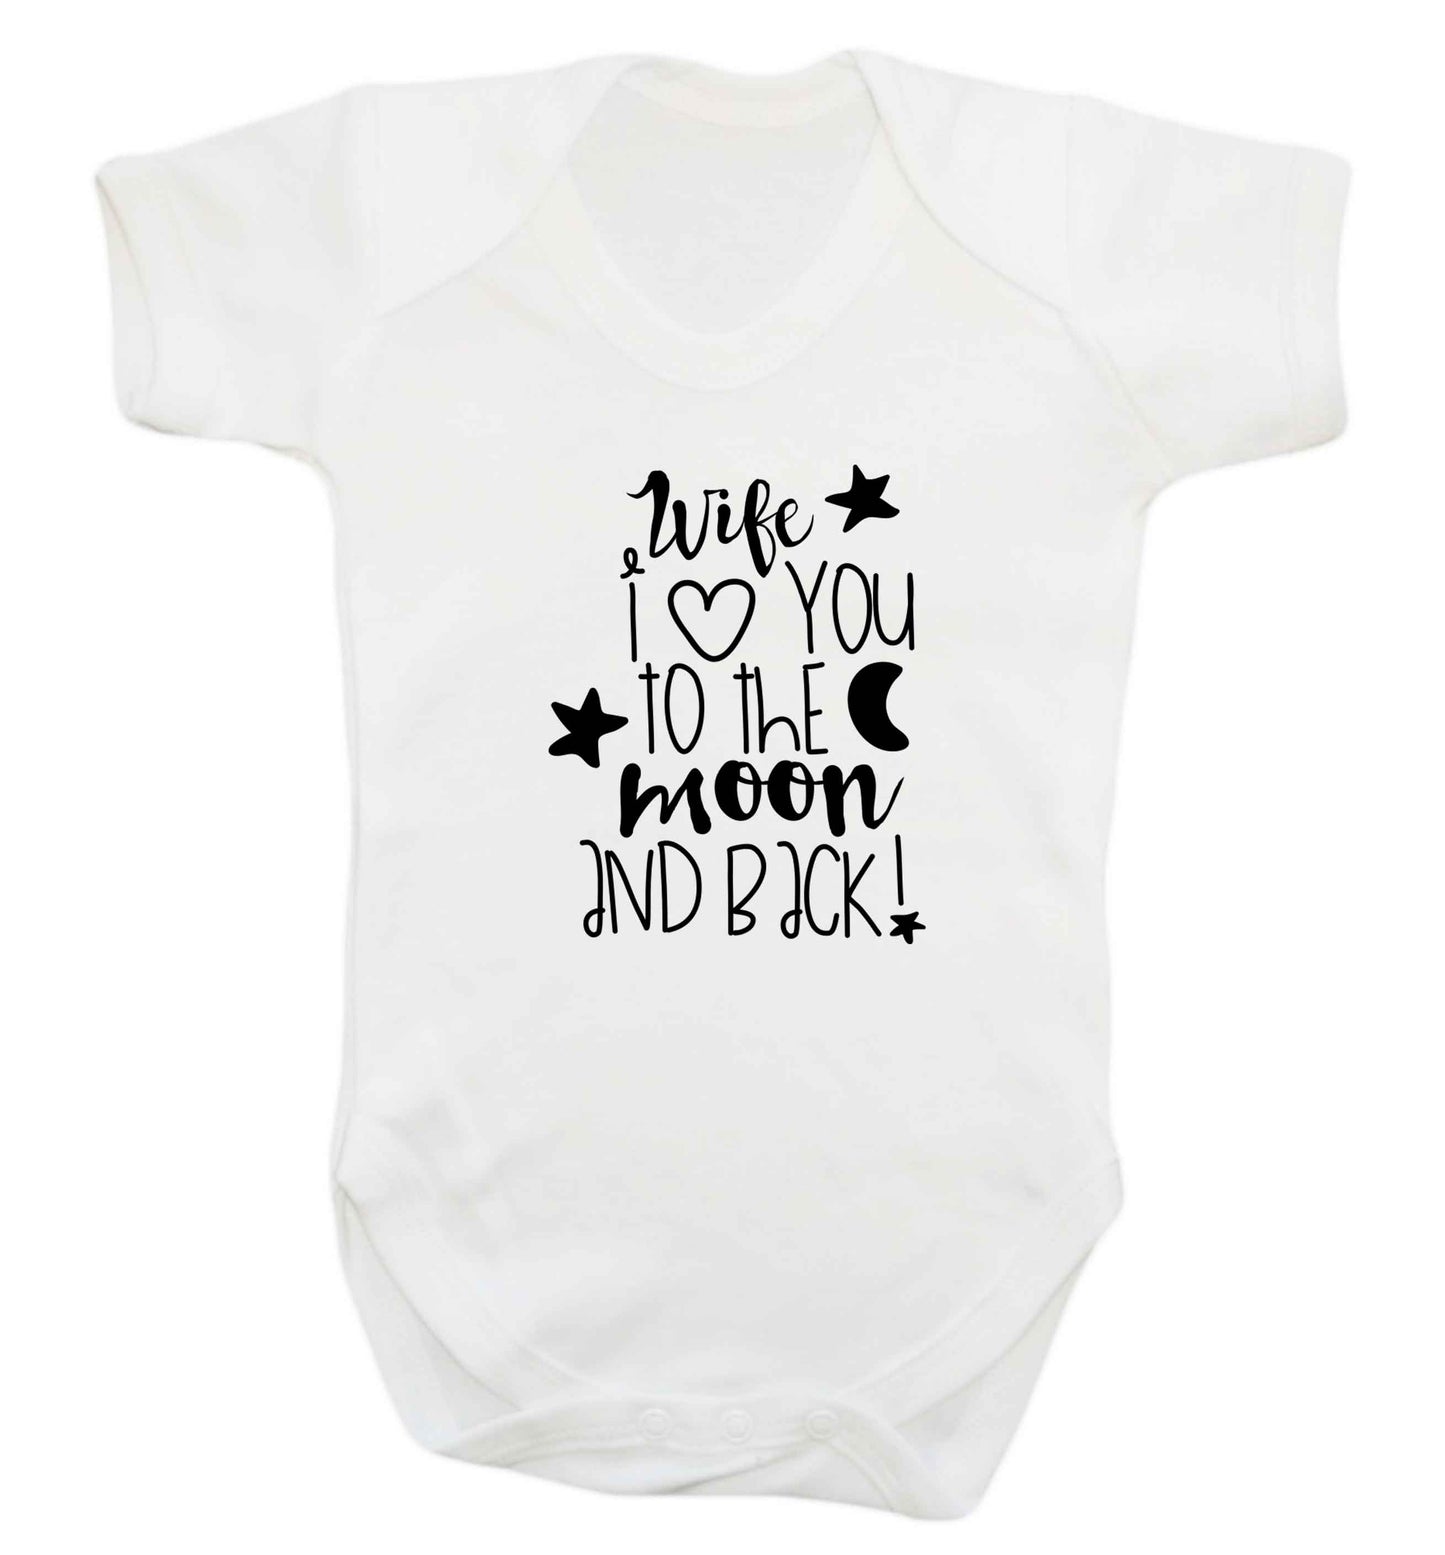 Wife I love you to the moon and back baby vest white 18-24 months